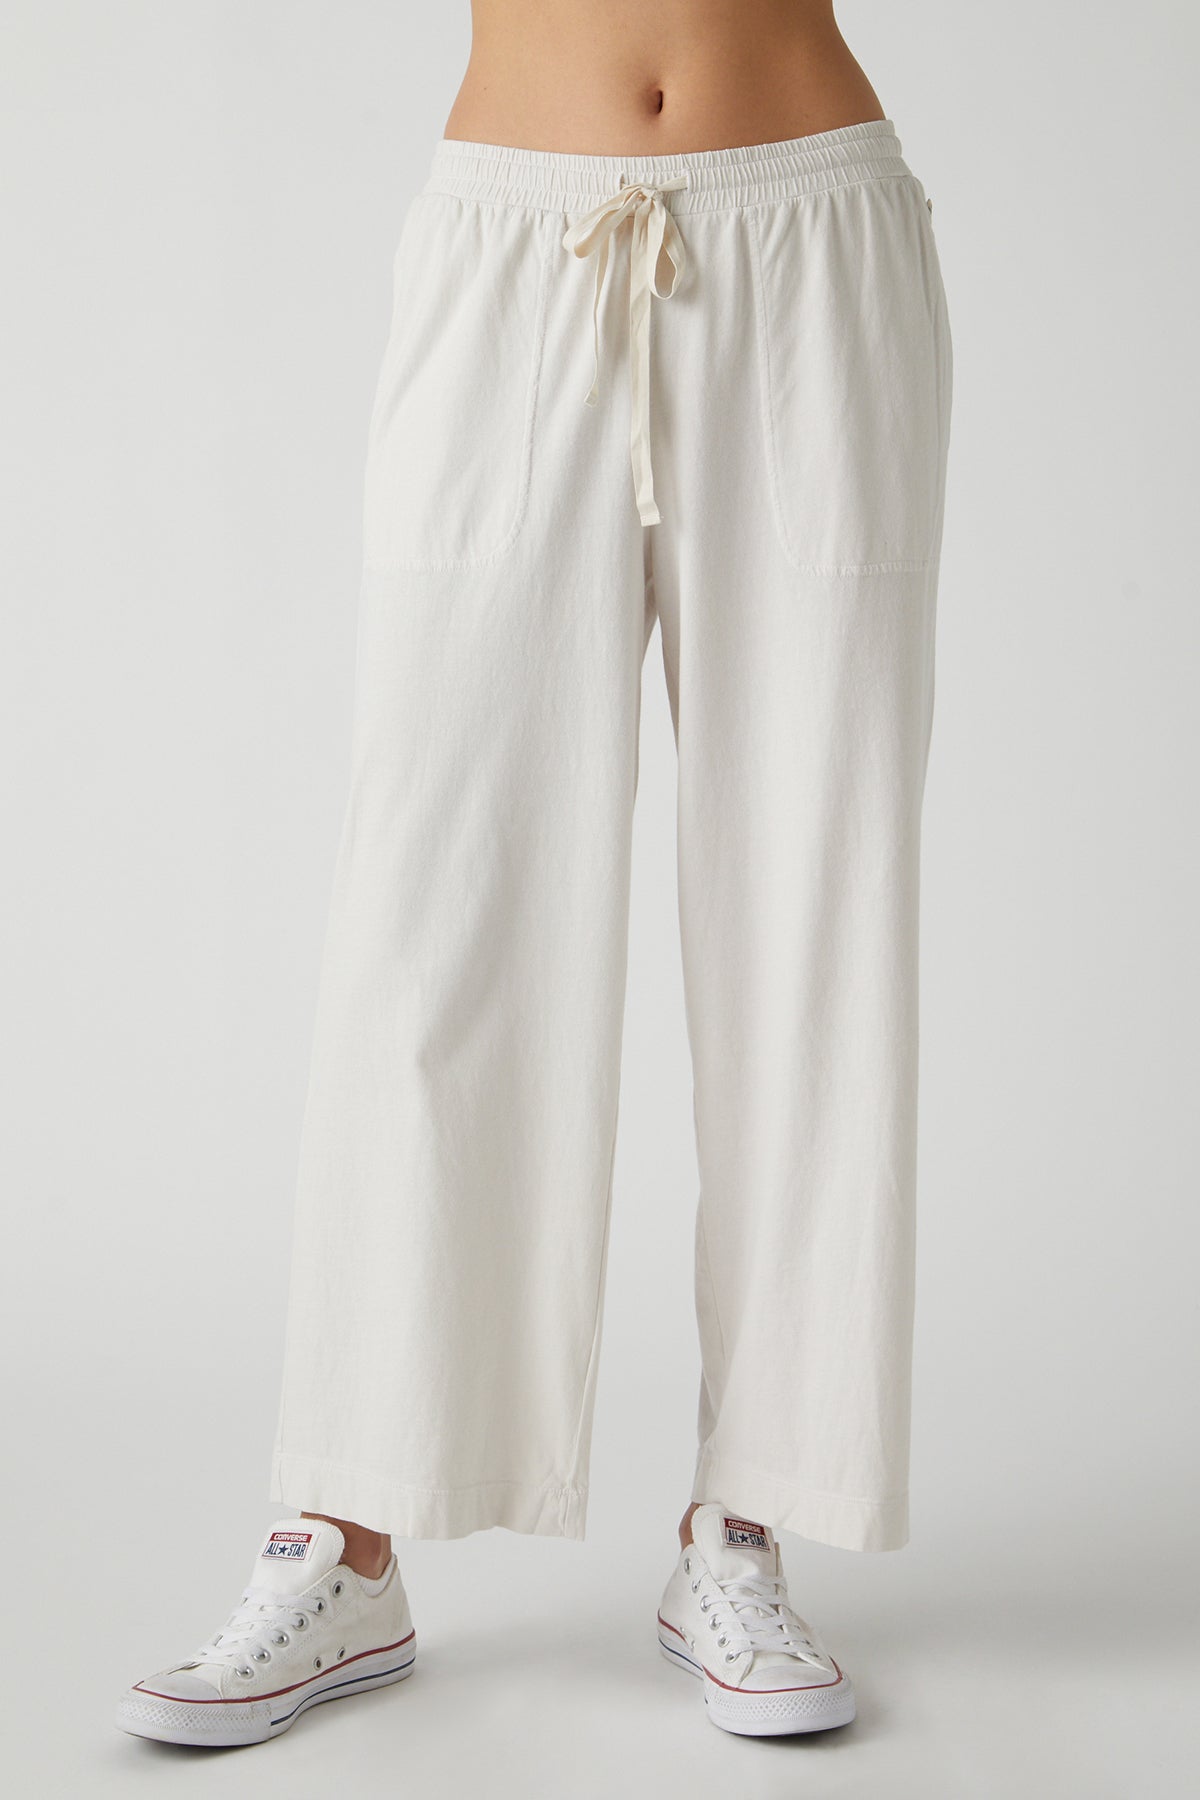 Pismo Pant in beach front-25156538564801